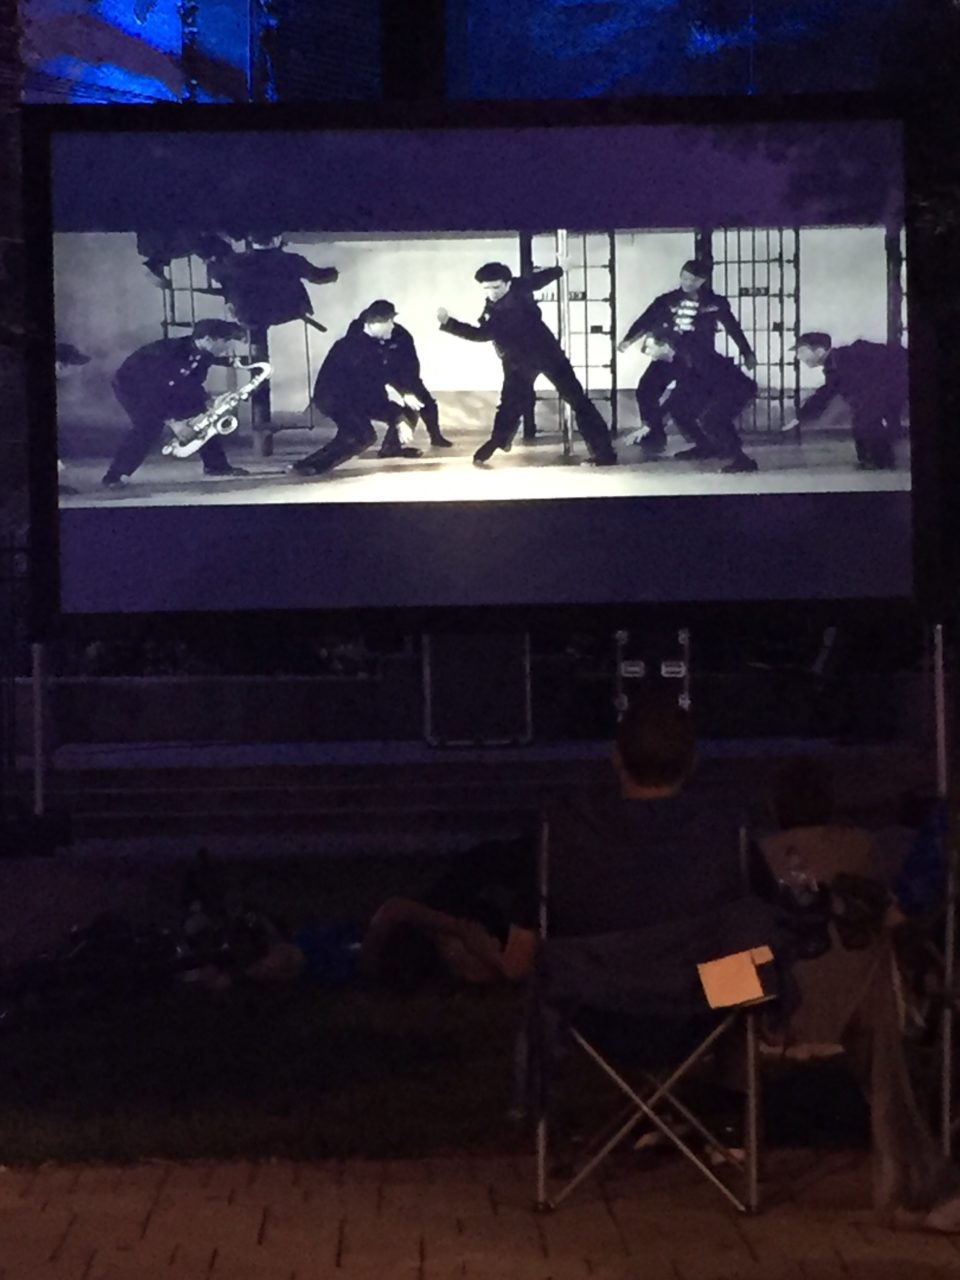 Jail House Rock playing at the Carolina Theatre Park during our event, Movies Under the Stars - 2017